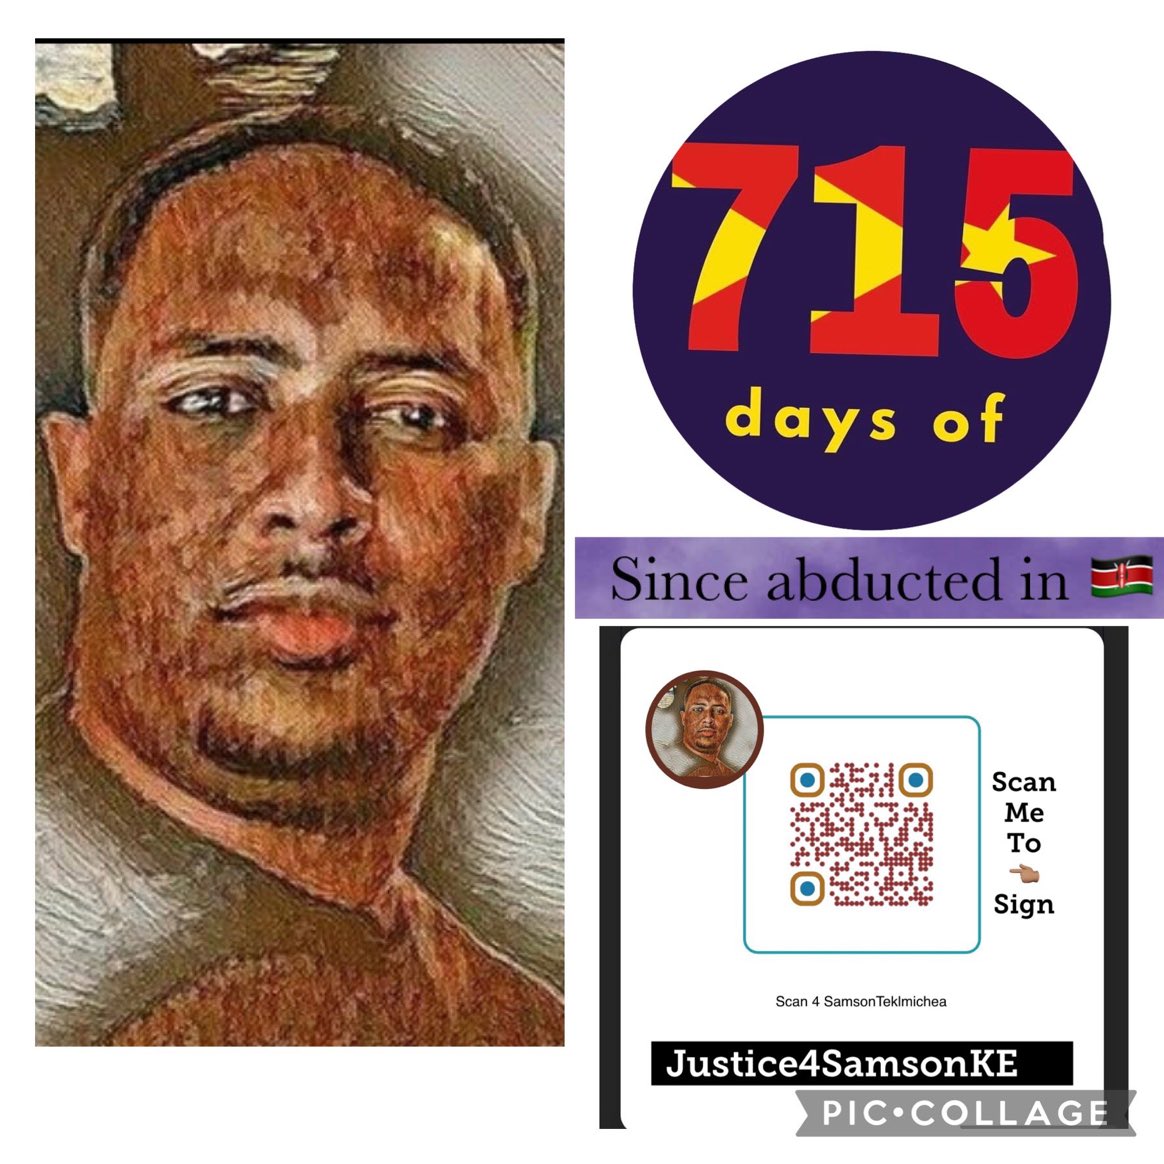 👉#715Days since #SamsonKE has been abducted in #Kenya. 💔. #715DaysIsToLong sign the petition for humanity's sake. #LegalNews #LawEnforcement #HumanRights75 #HumanityFirst
#JusticeForSamson